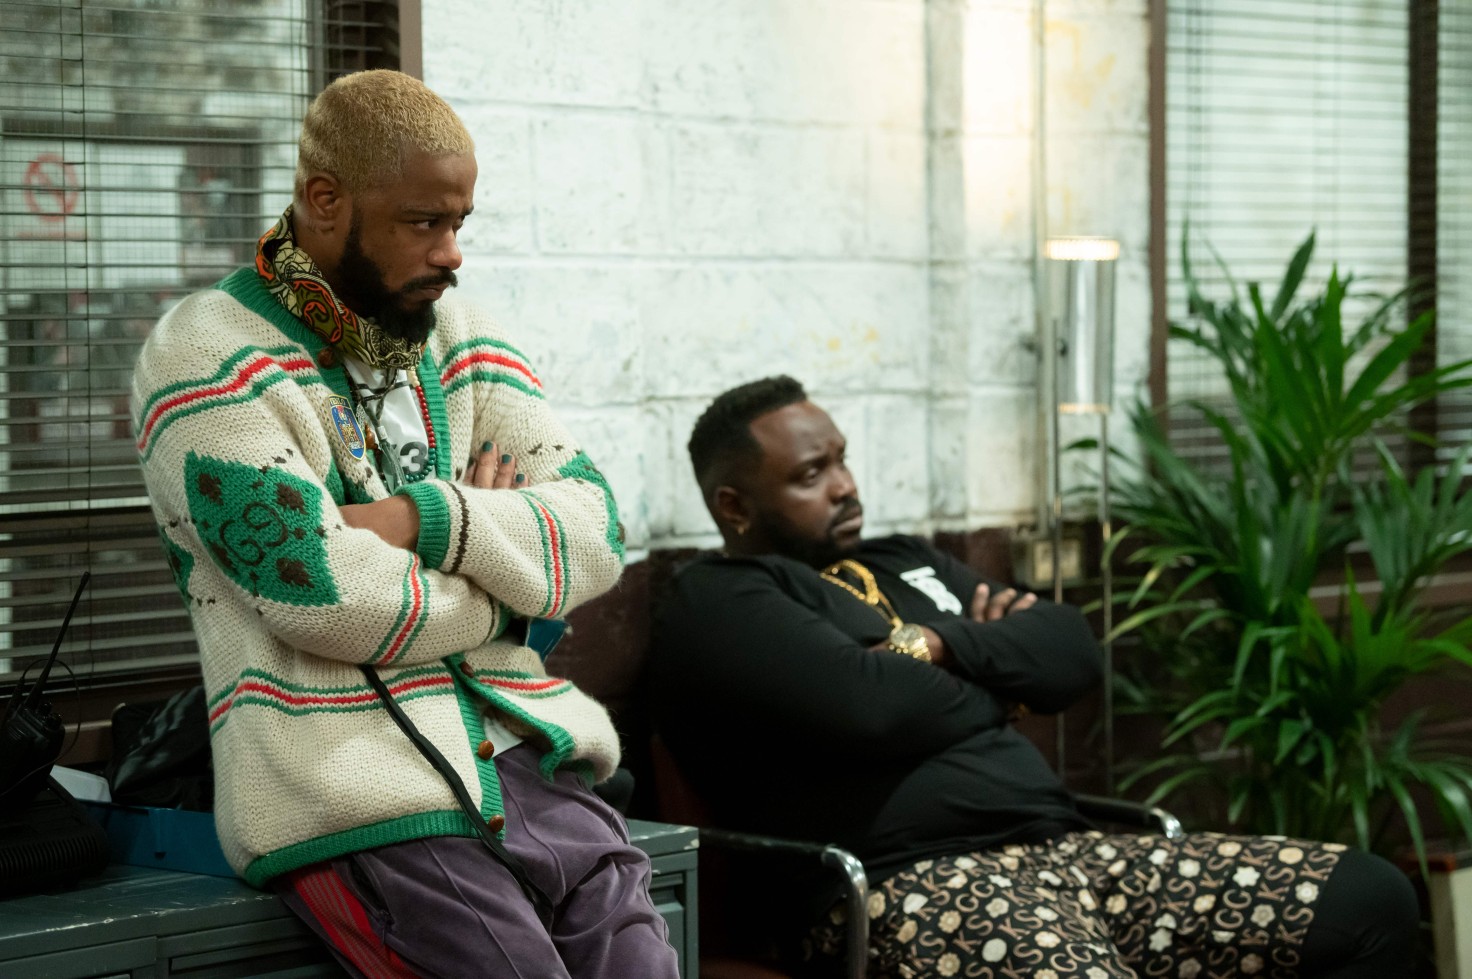 Two Black men (LaKeith Stanfield and Bryan Tyree Henry) stare skeptically offscreen. LaKeith leans against a wall in the foreground with his arms crossed against his chest, while Bryan sits in a chair, arms also crossed.